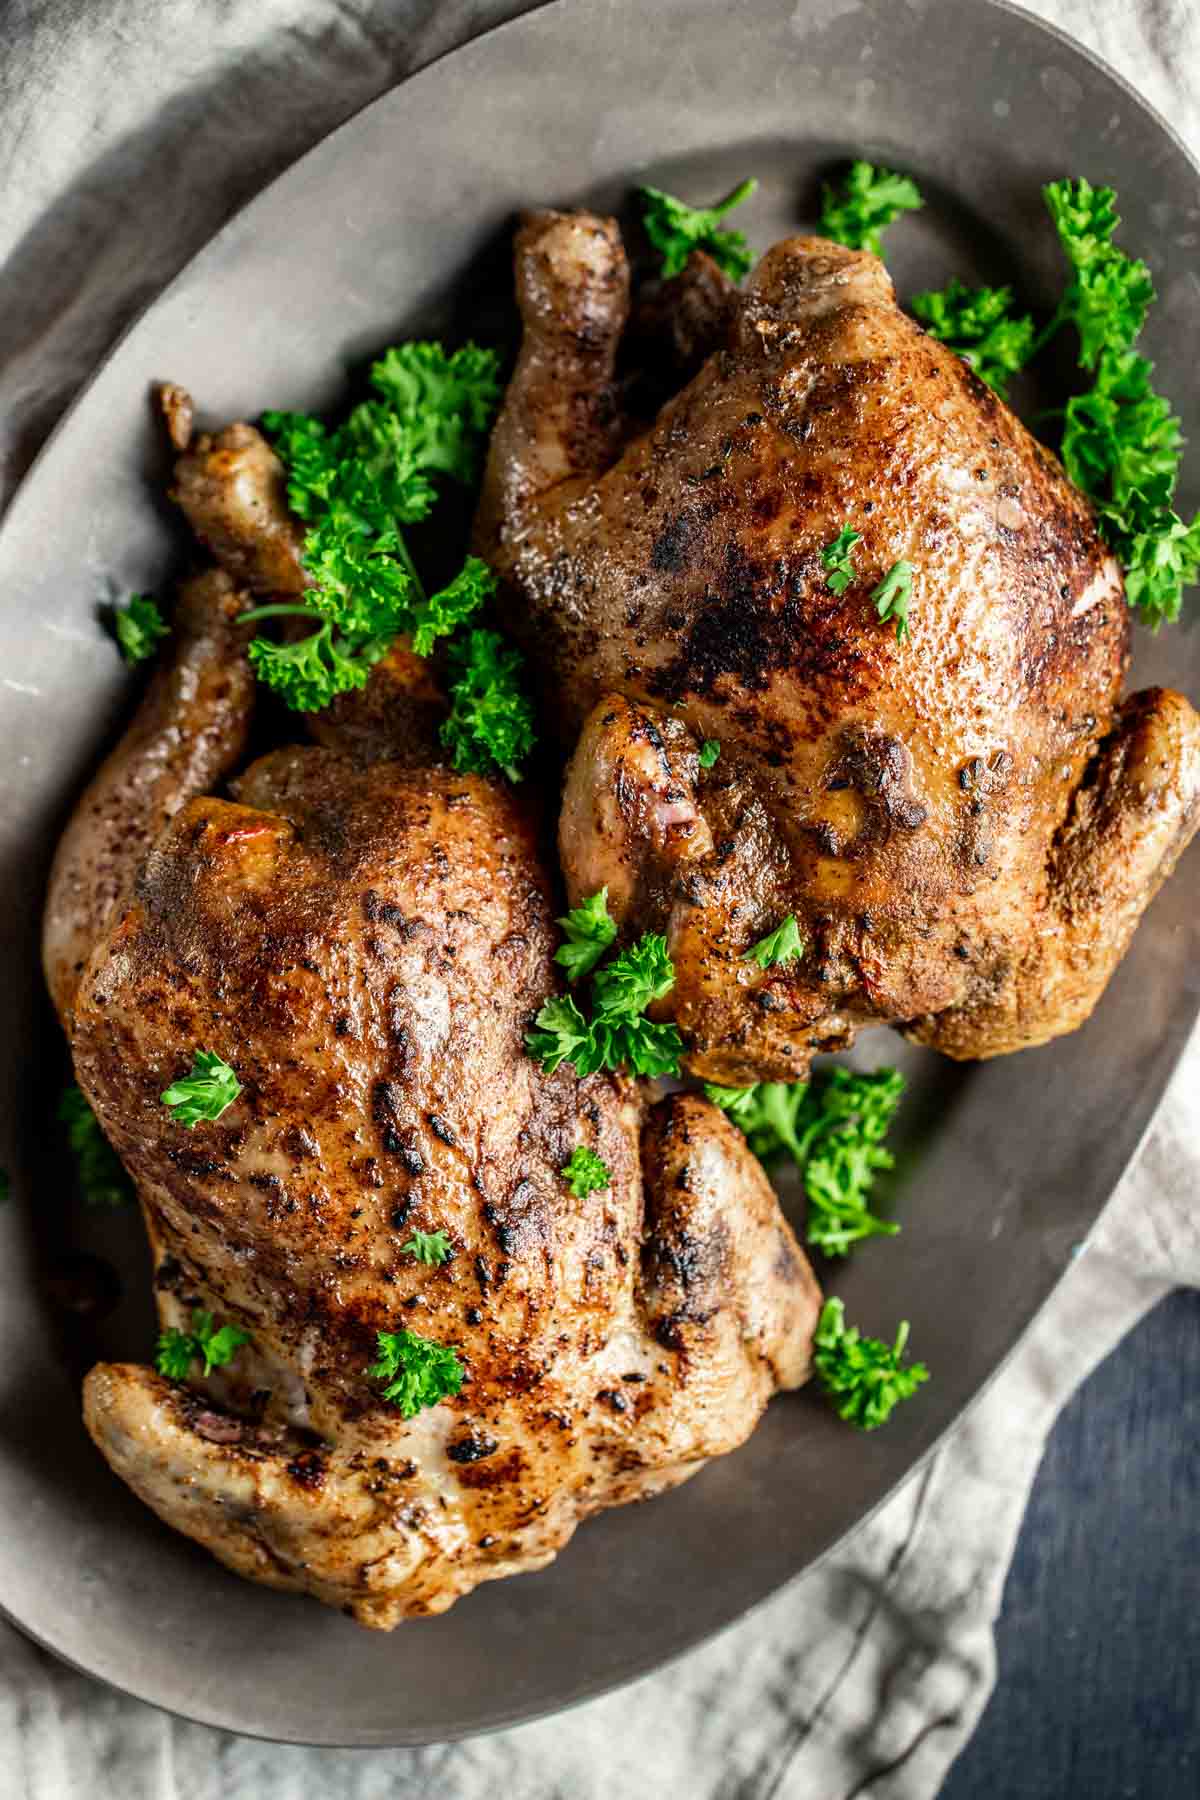 Overhead view of two cornish hens served on a grey platter with fresh herbs.